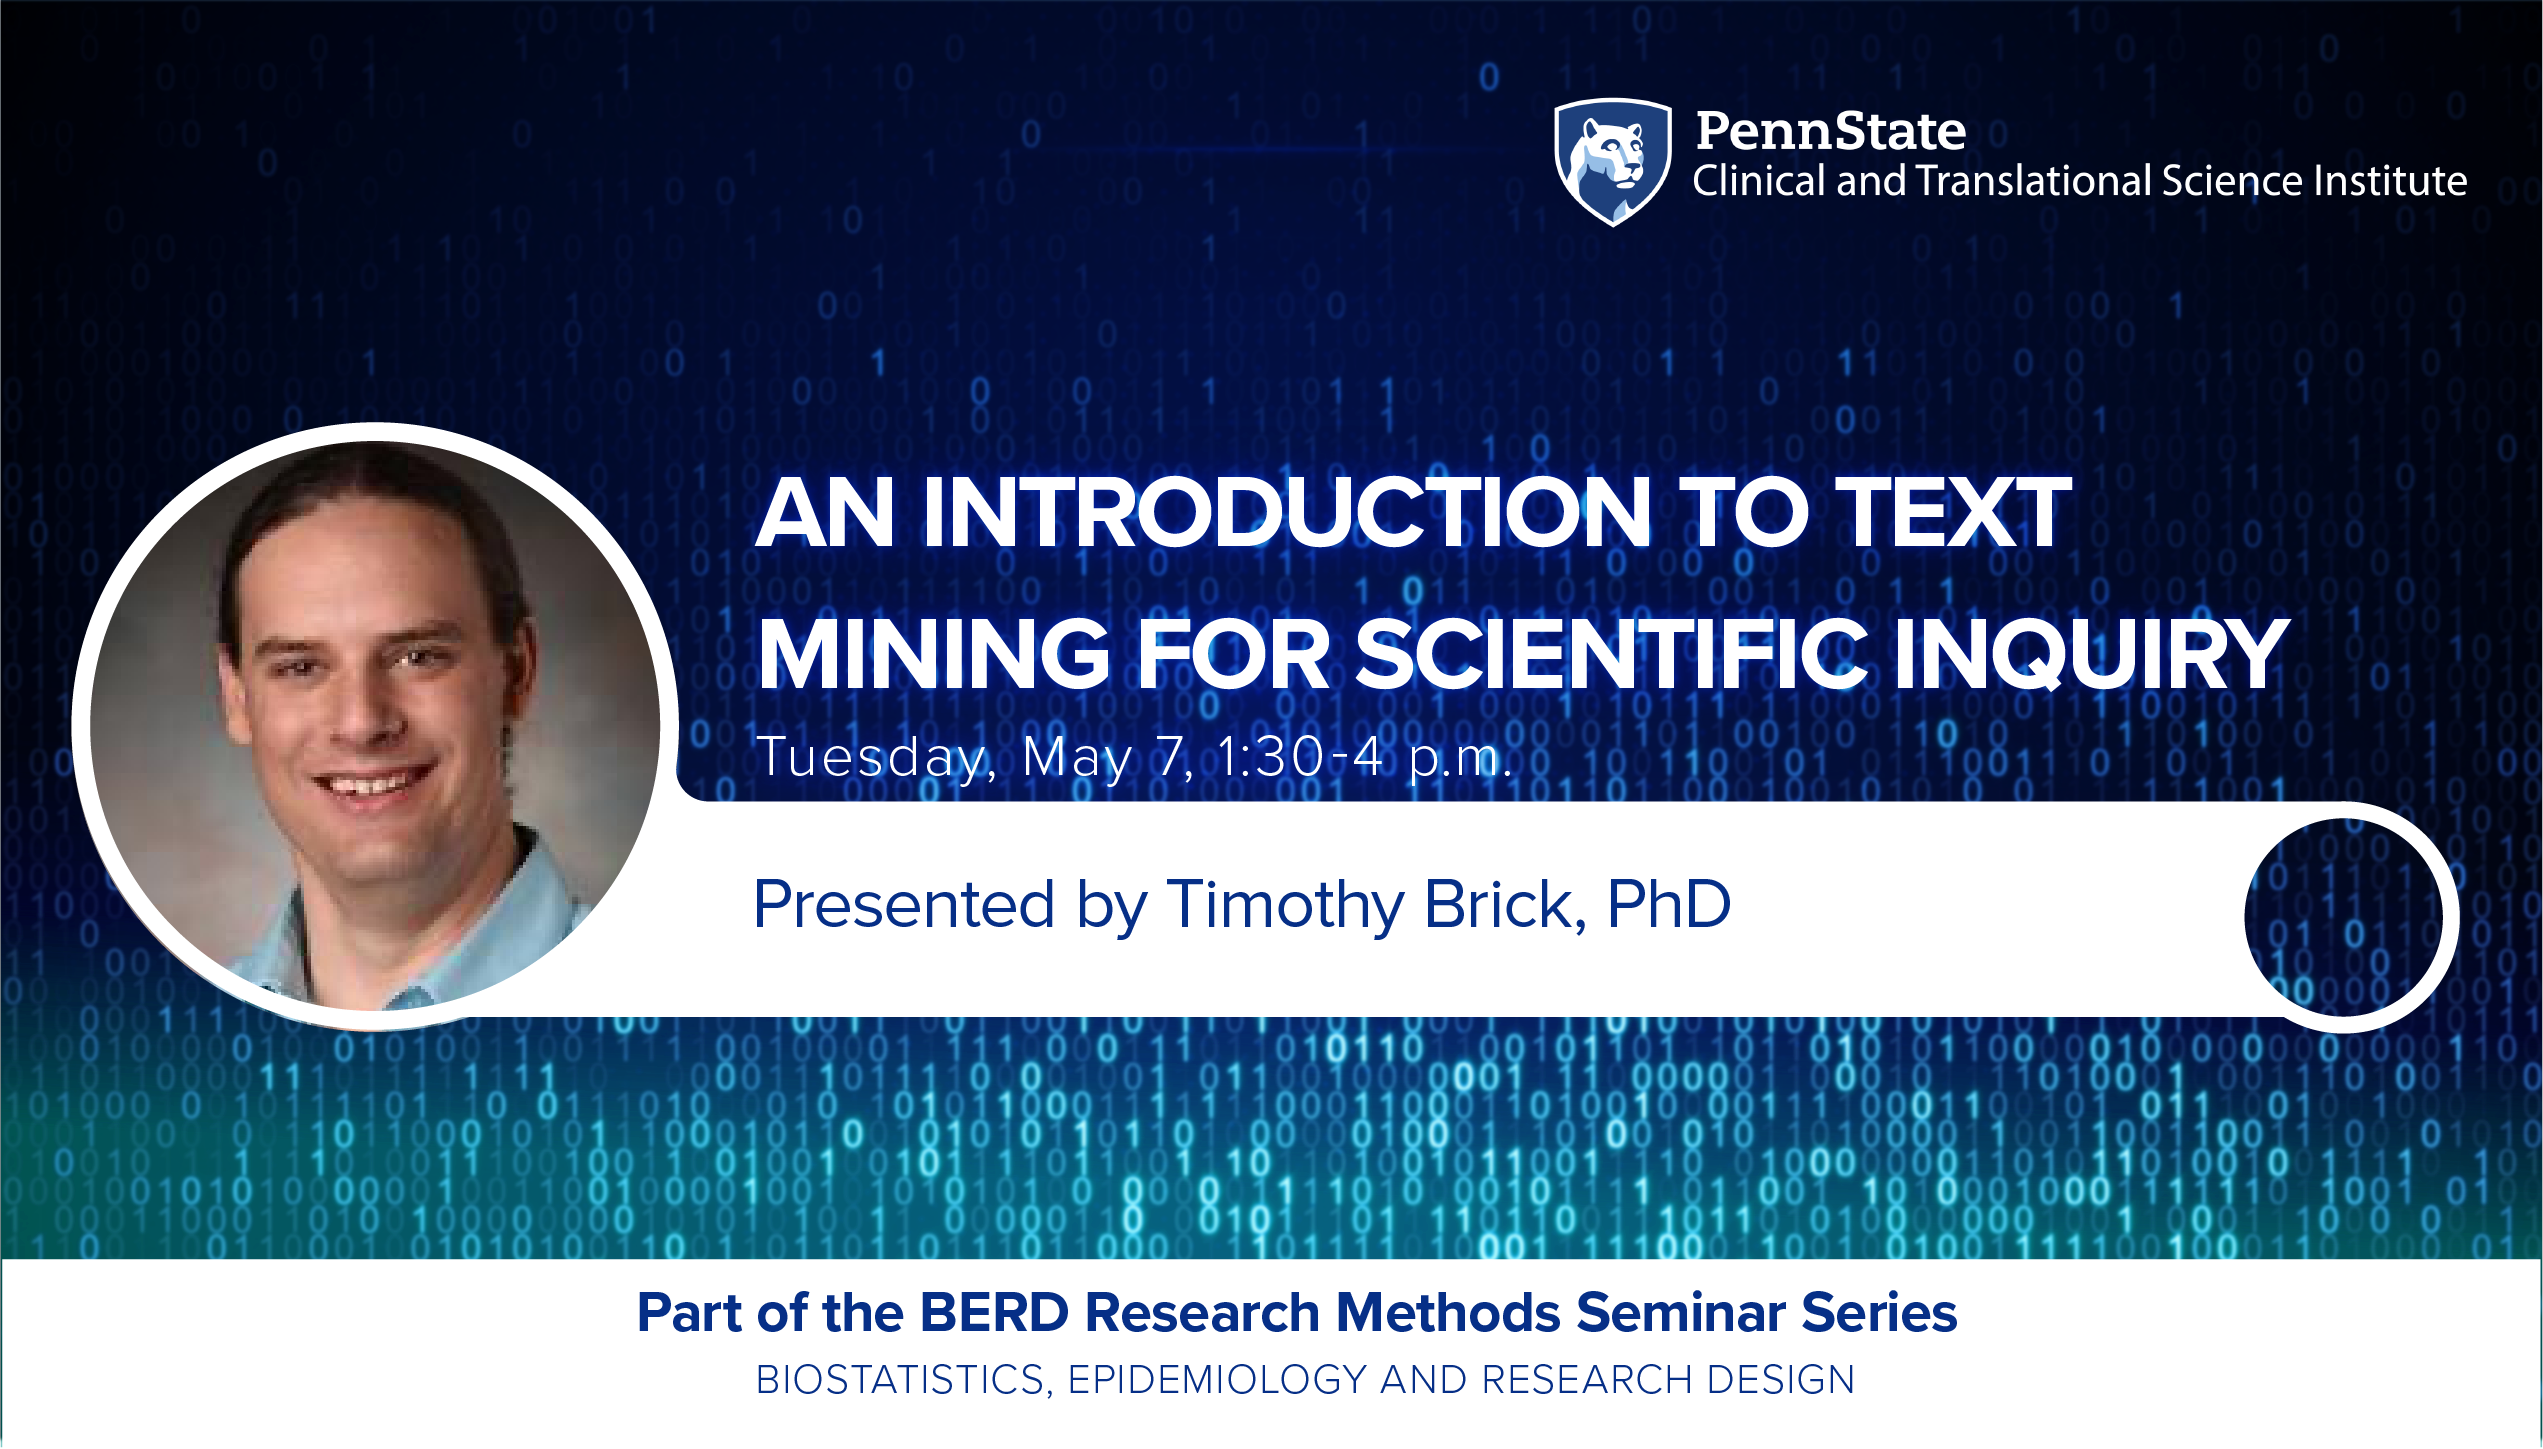 An Introduction to Text Mining for Scientific Inquiry by Tim Brick, PhD